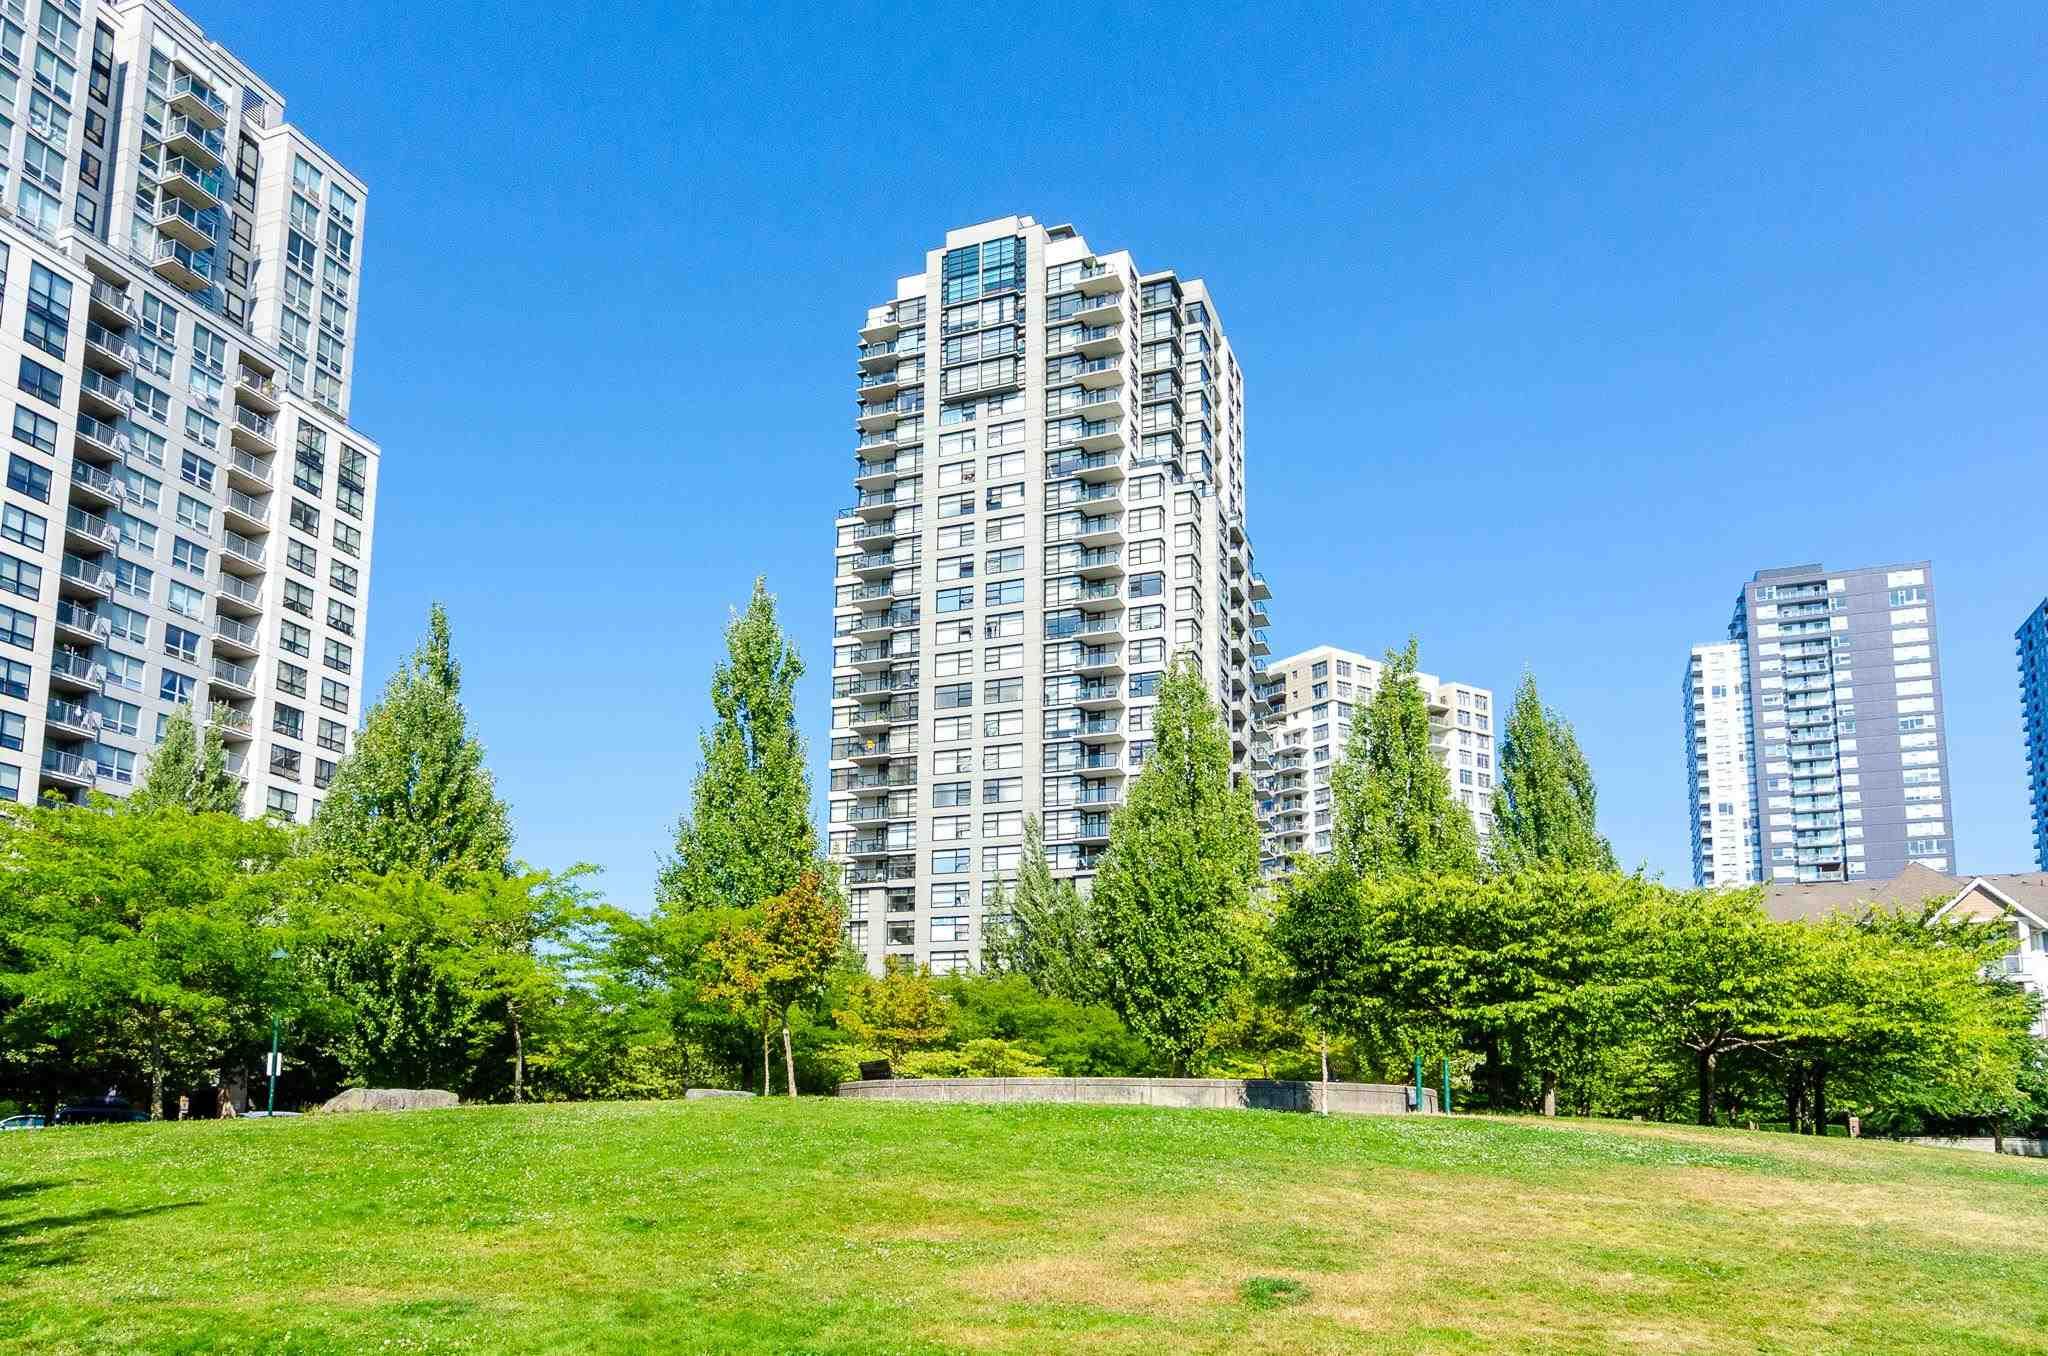 Main Photo: 117 5380 OBEN Street in Vancouver: Collingwood VE Condo for sale (Vancouver East)  : MLS®# R2605564